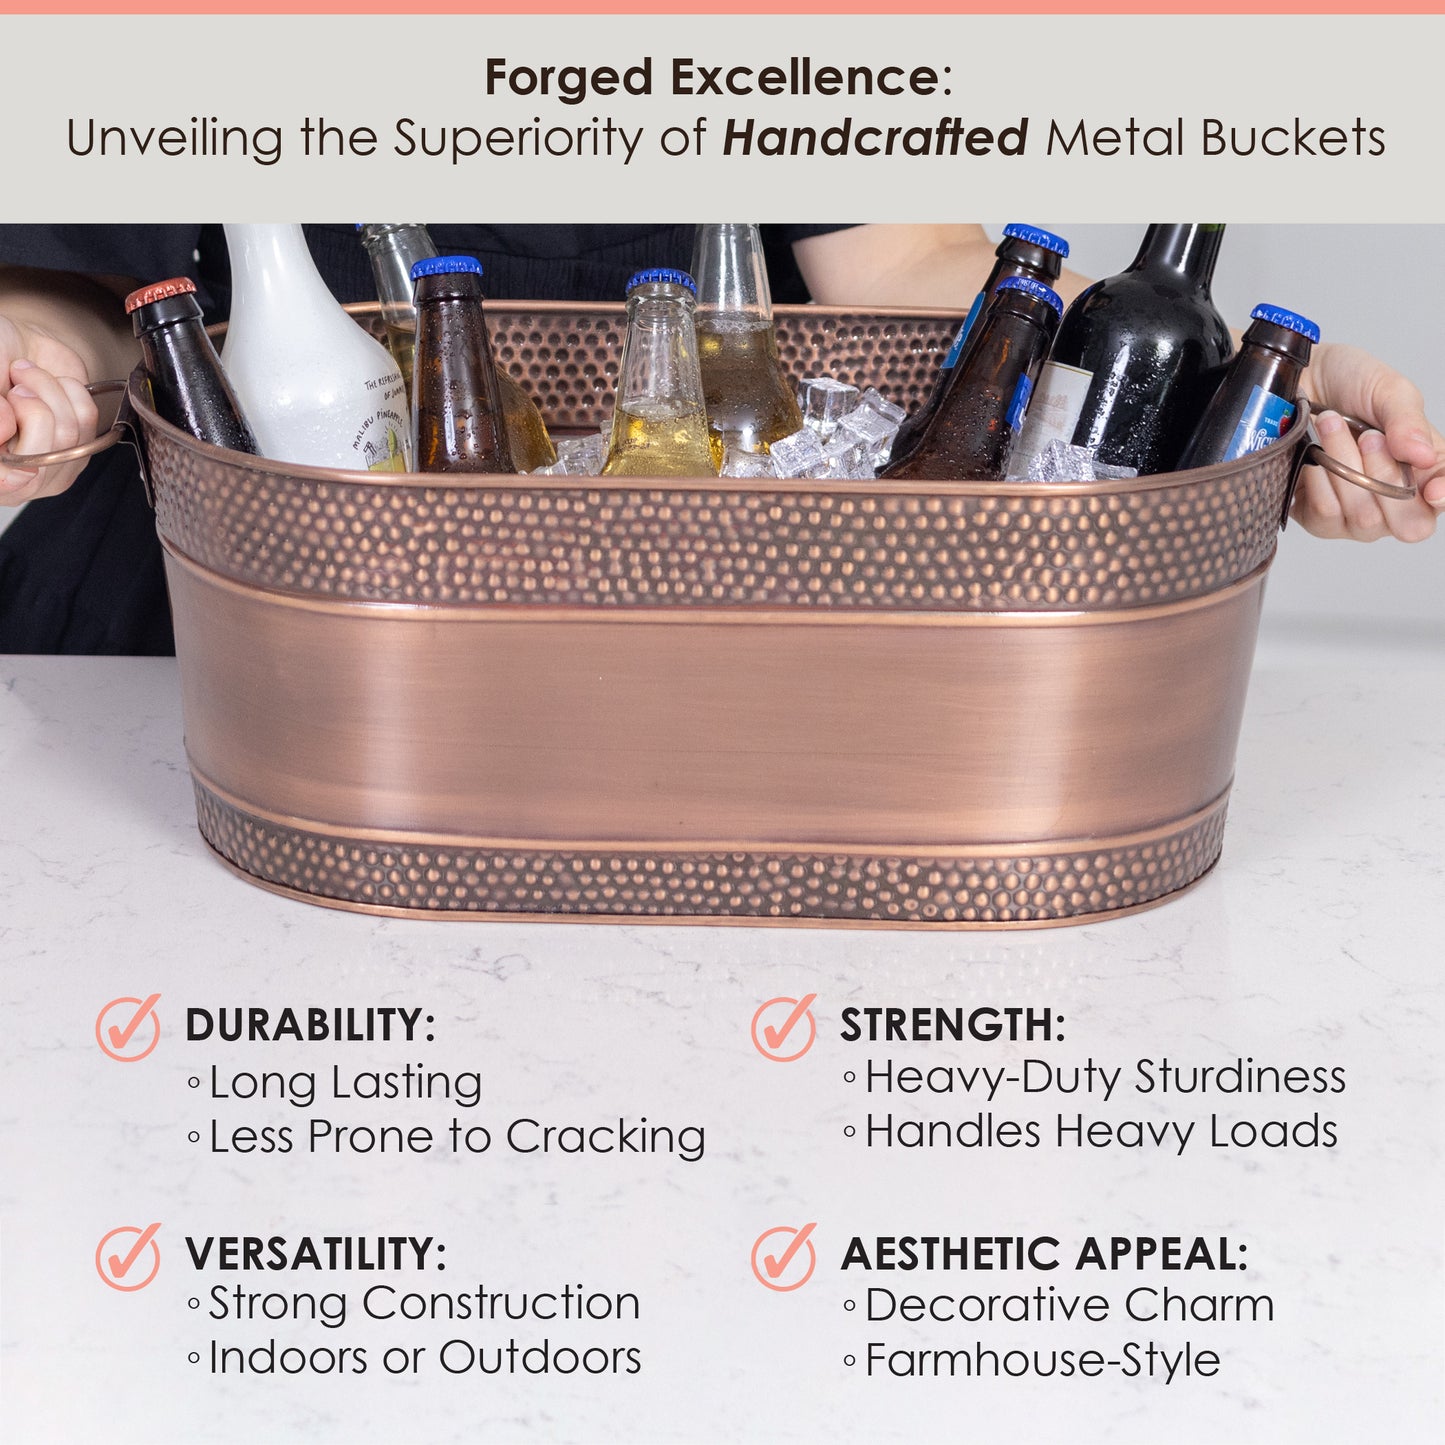 Oval copper drink tub that is handcrafted for heavy duty sturdiness to handle heavy loads indoors or outdoors.  Enjoy the long lasting strong construction with a decorative farmhouse-style charm.